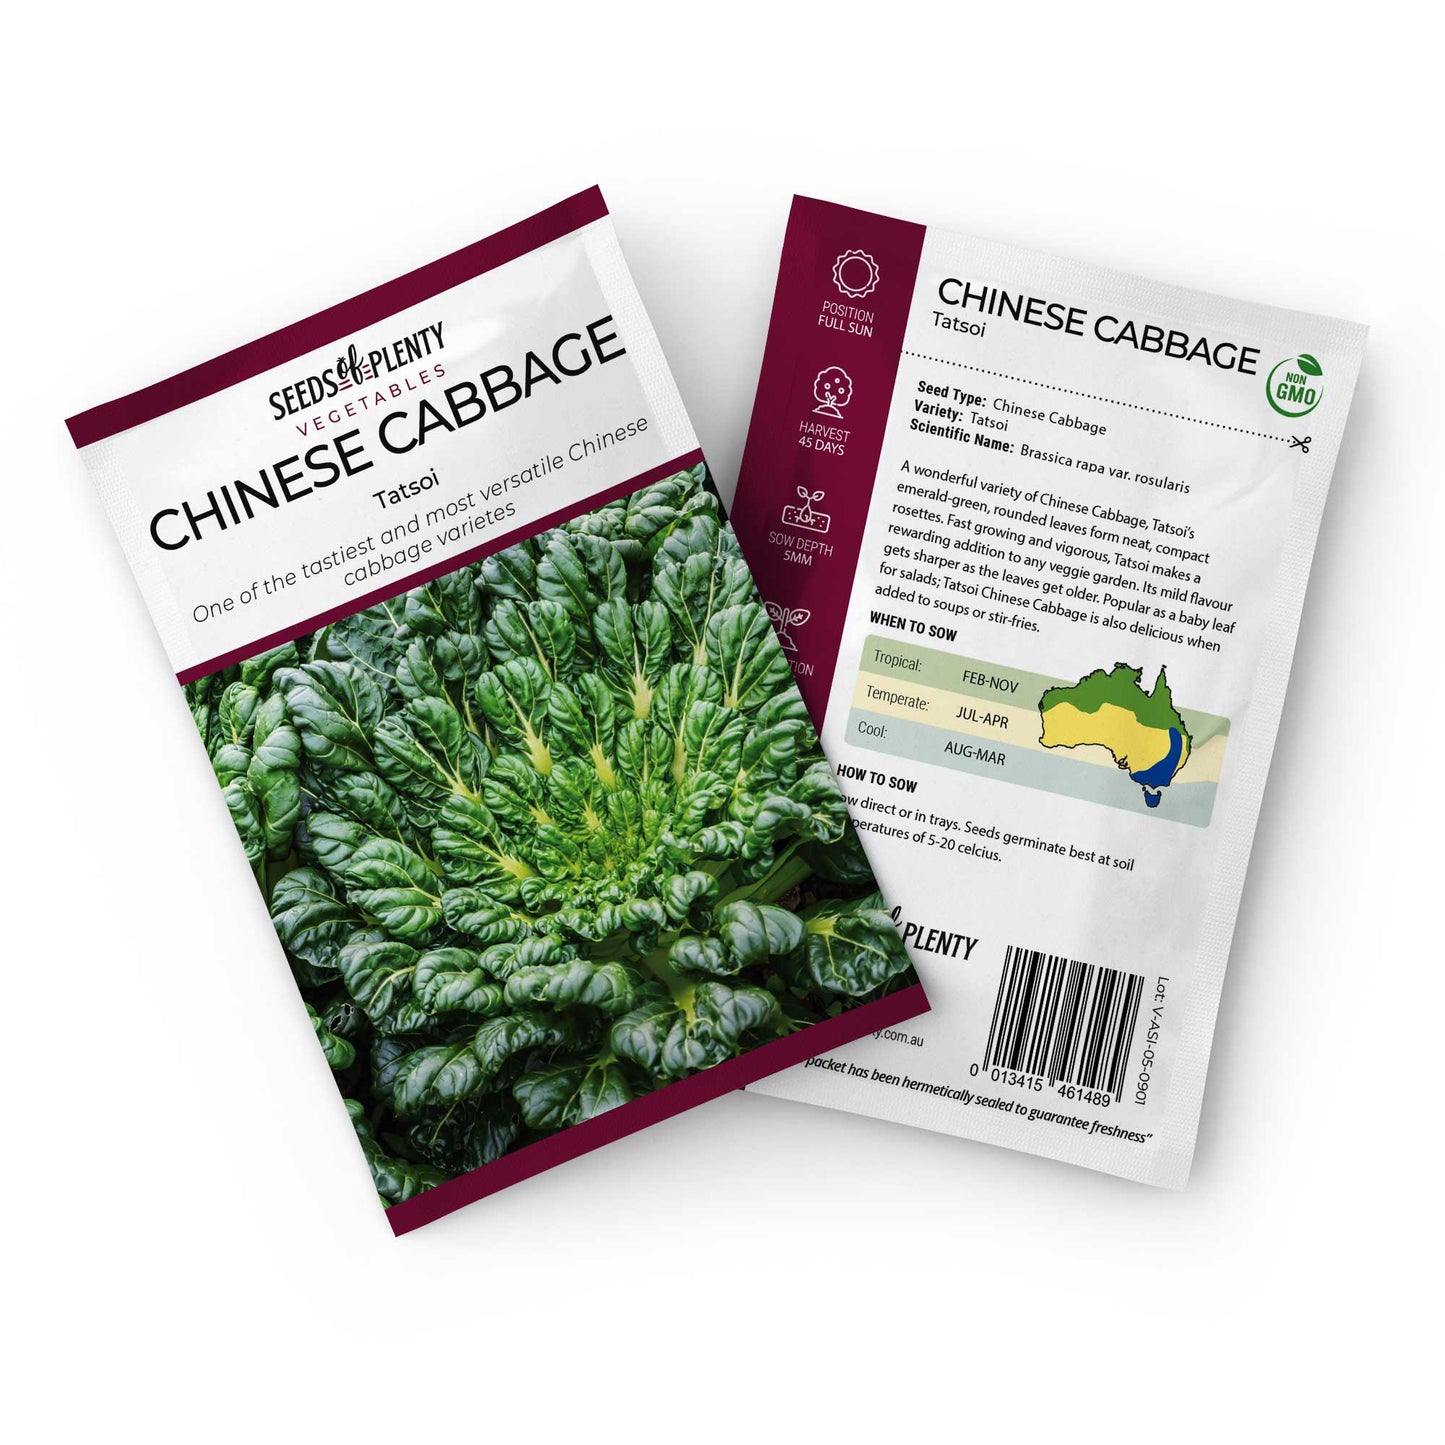 CHINESE CABBAGE - Tatsoi Default Title